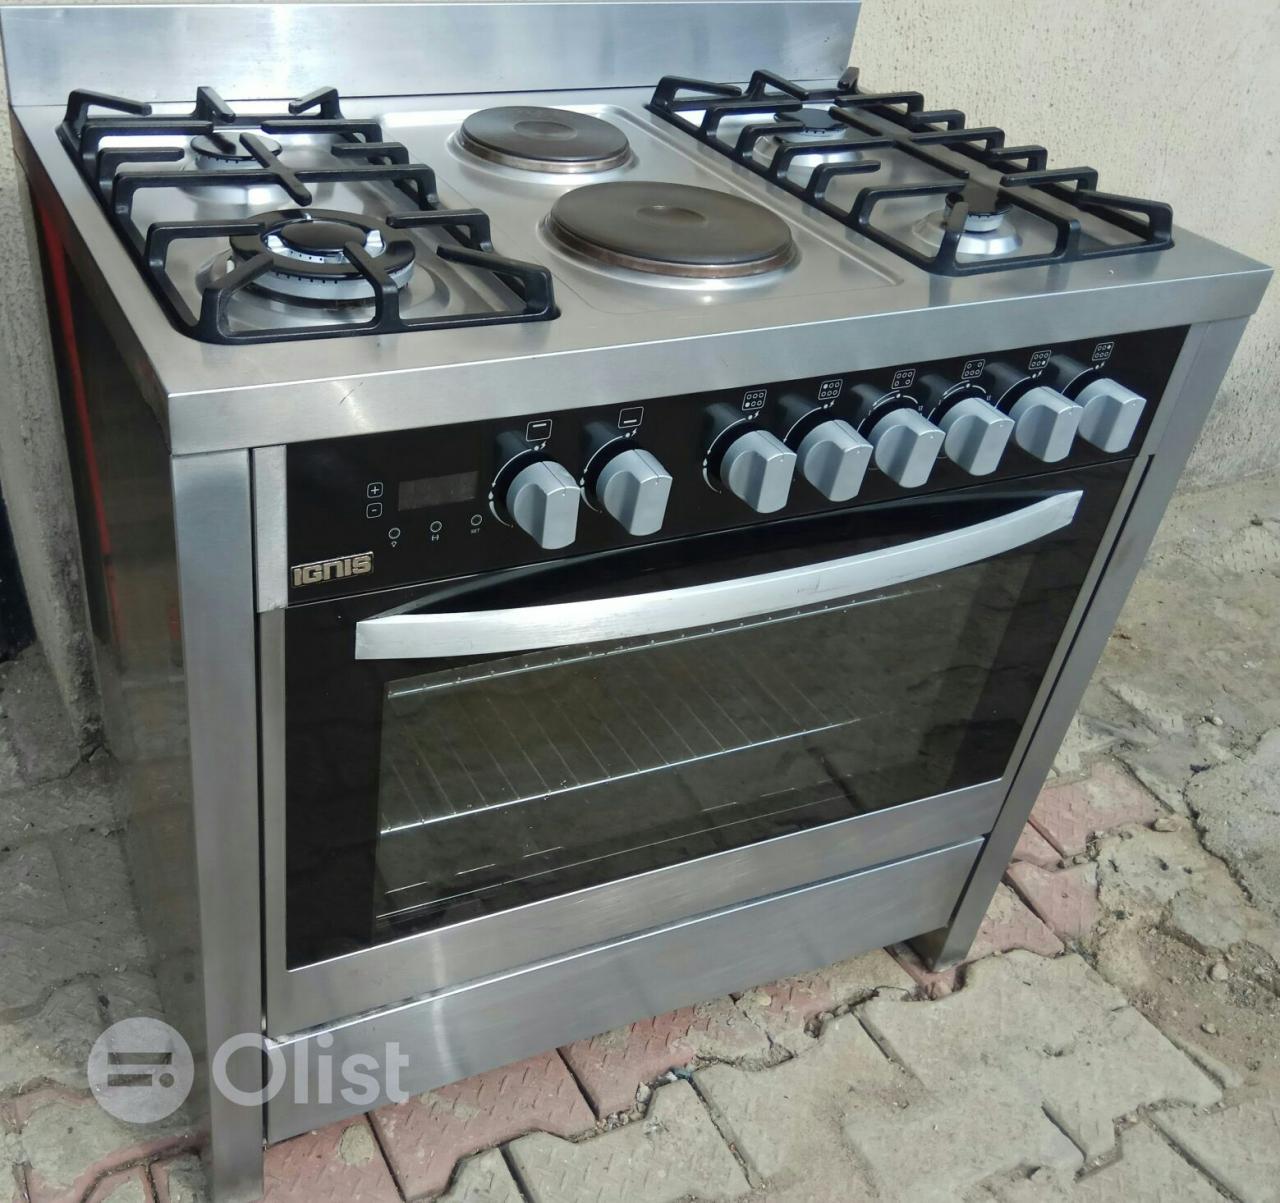 Ignis Gas Cooker Specification & Price In Nigeria